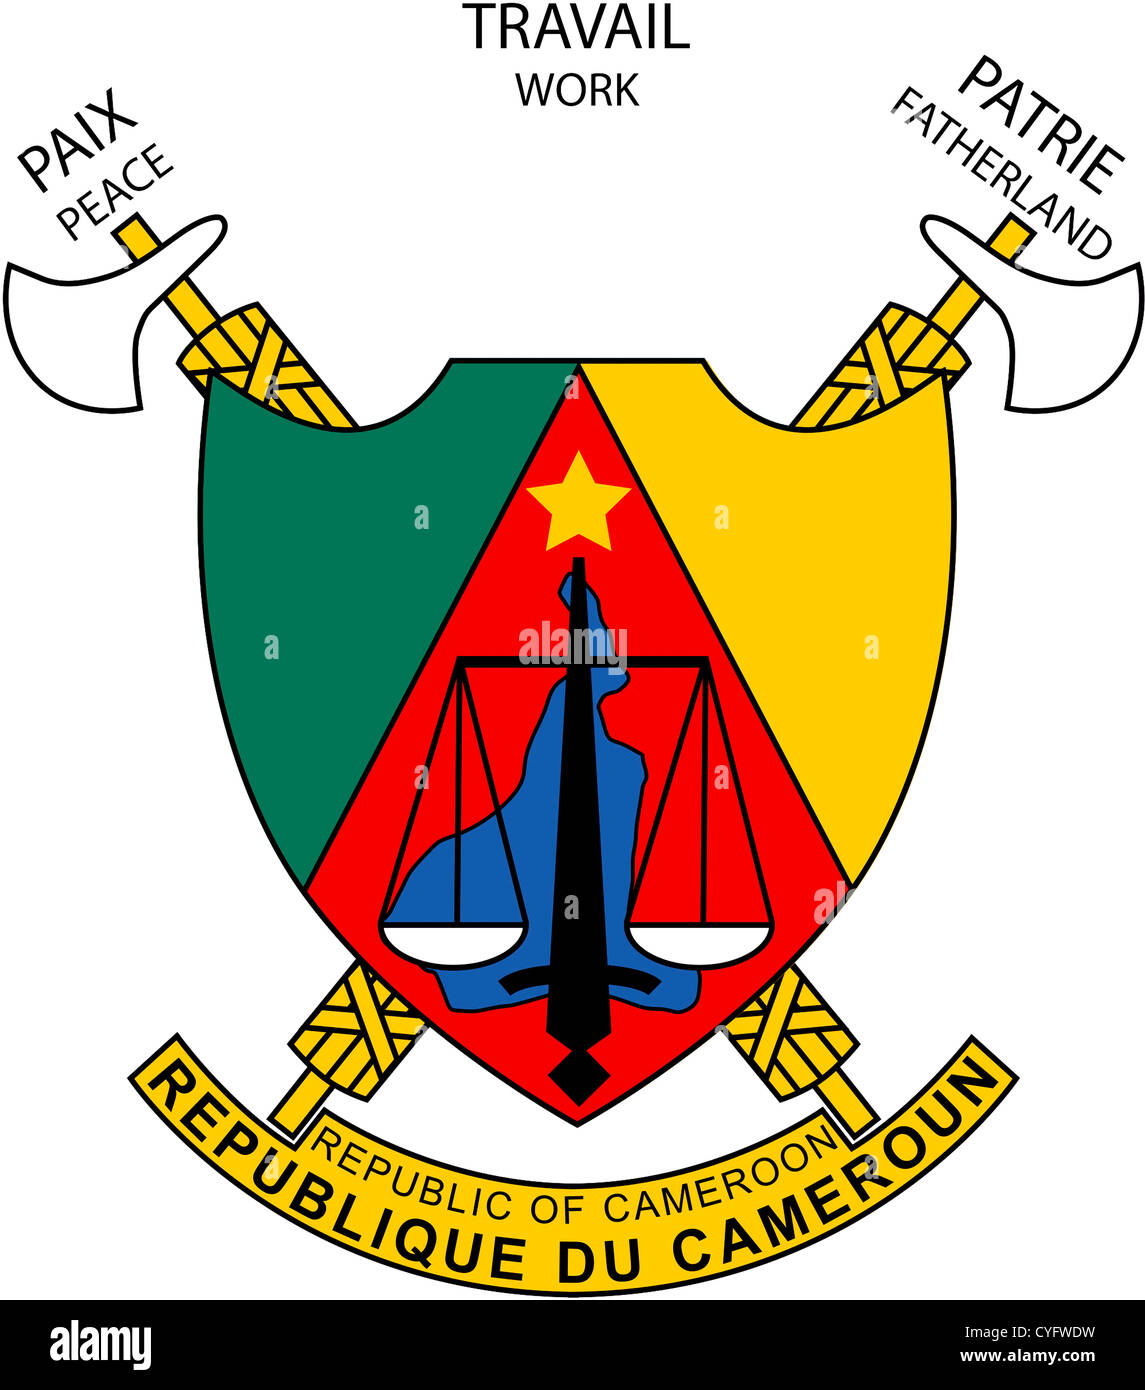 Coat of arms of the Republic of Cameroon. Stock Photo